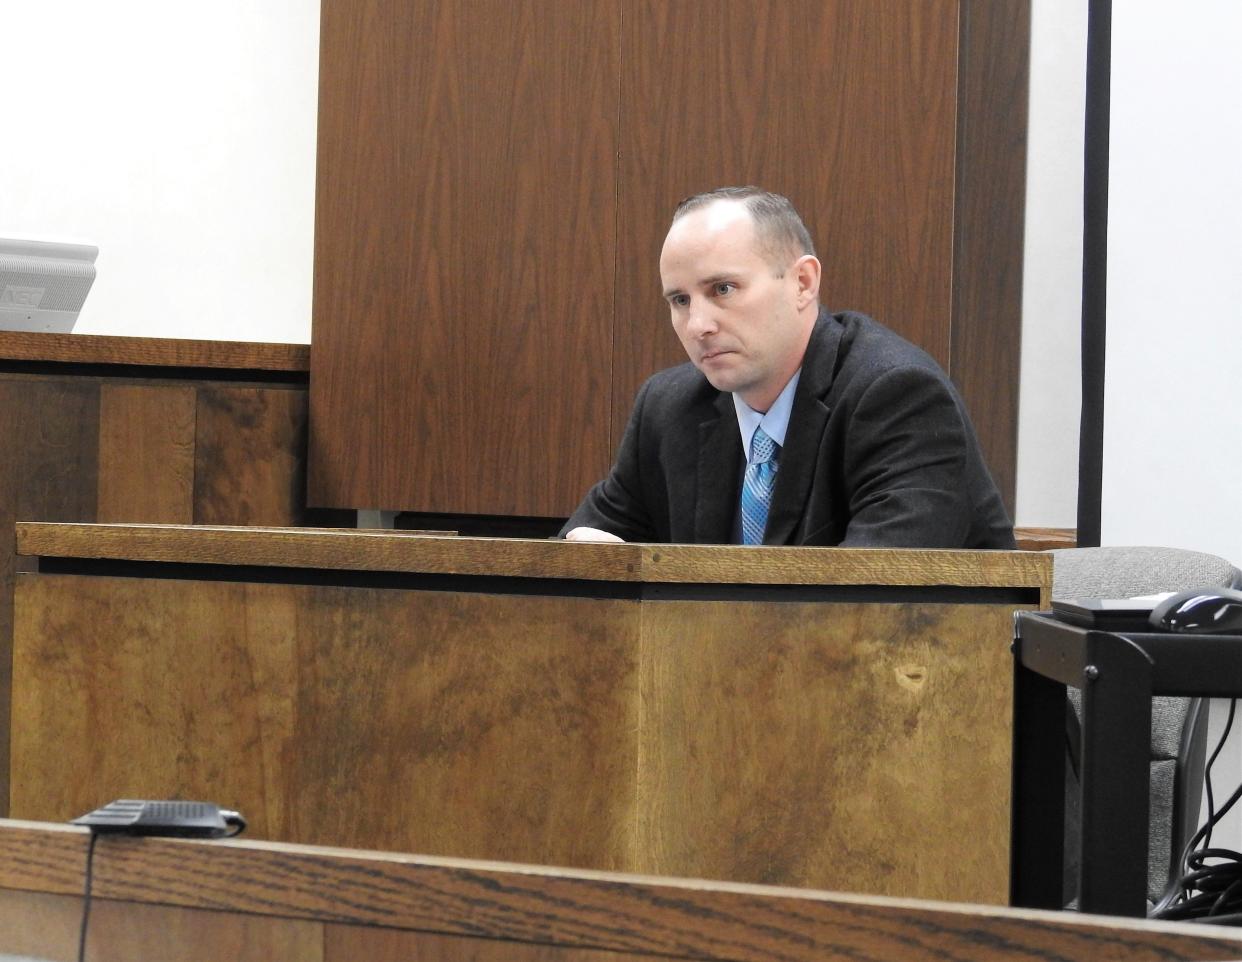 Craig Bordenkircher on the stand during his bench trial relating to a dilapidated structure on his property, namely a garage with an alleged bad roof.